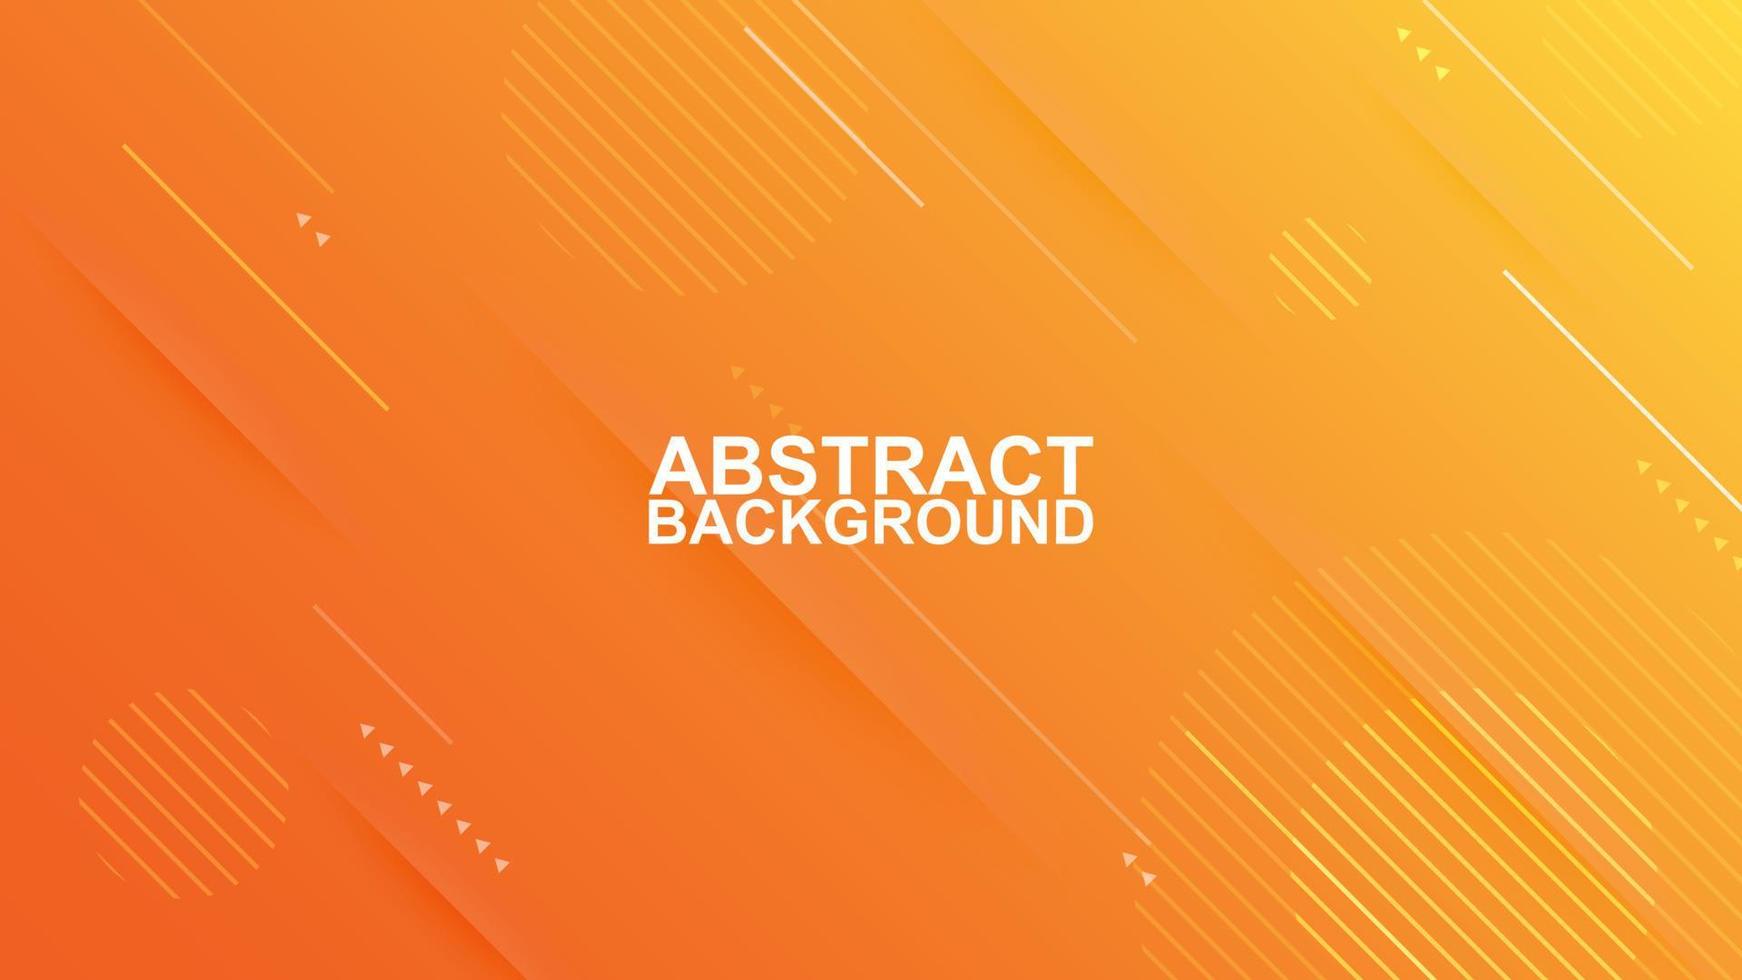 abstract geometric modern elegant with line and triangle shape in orange and yellow background vector illustrations EPS10